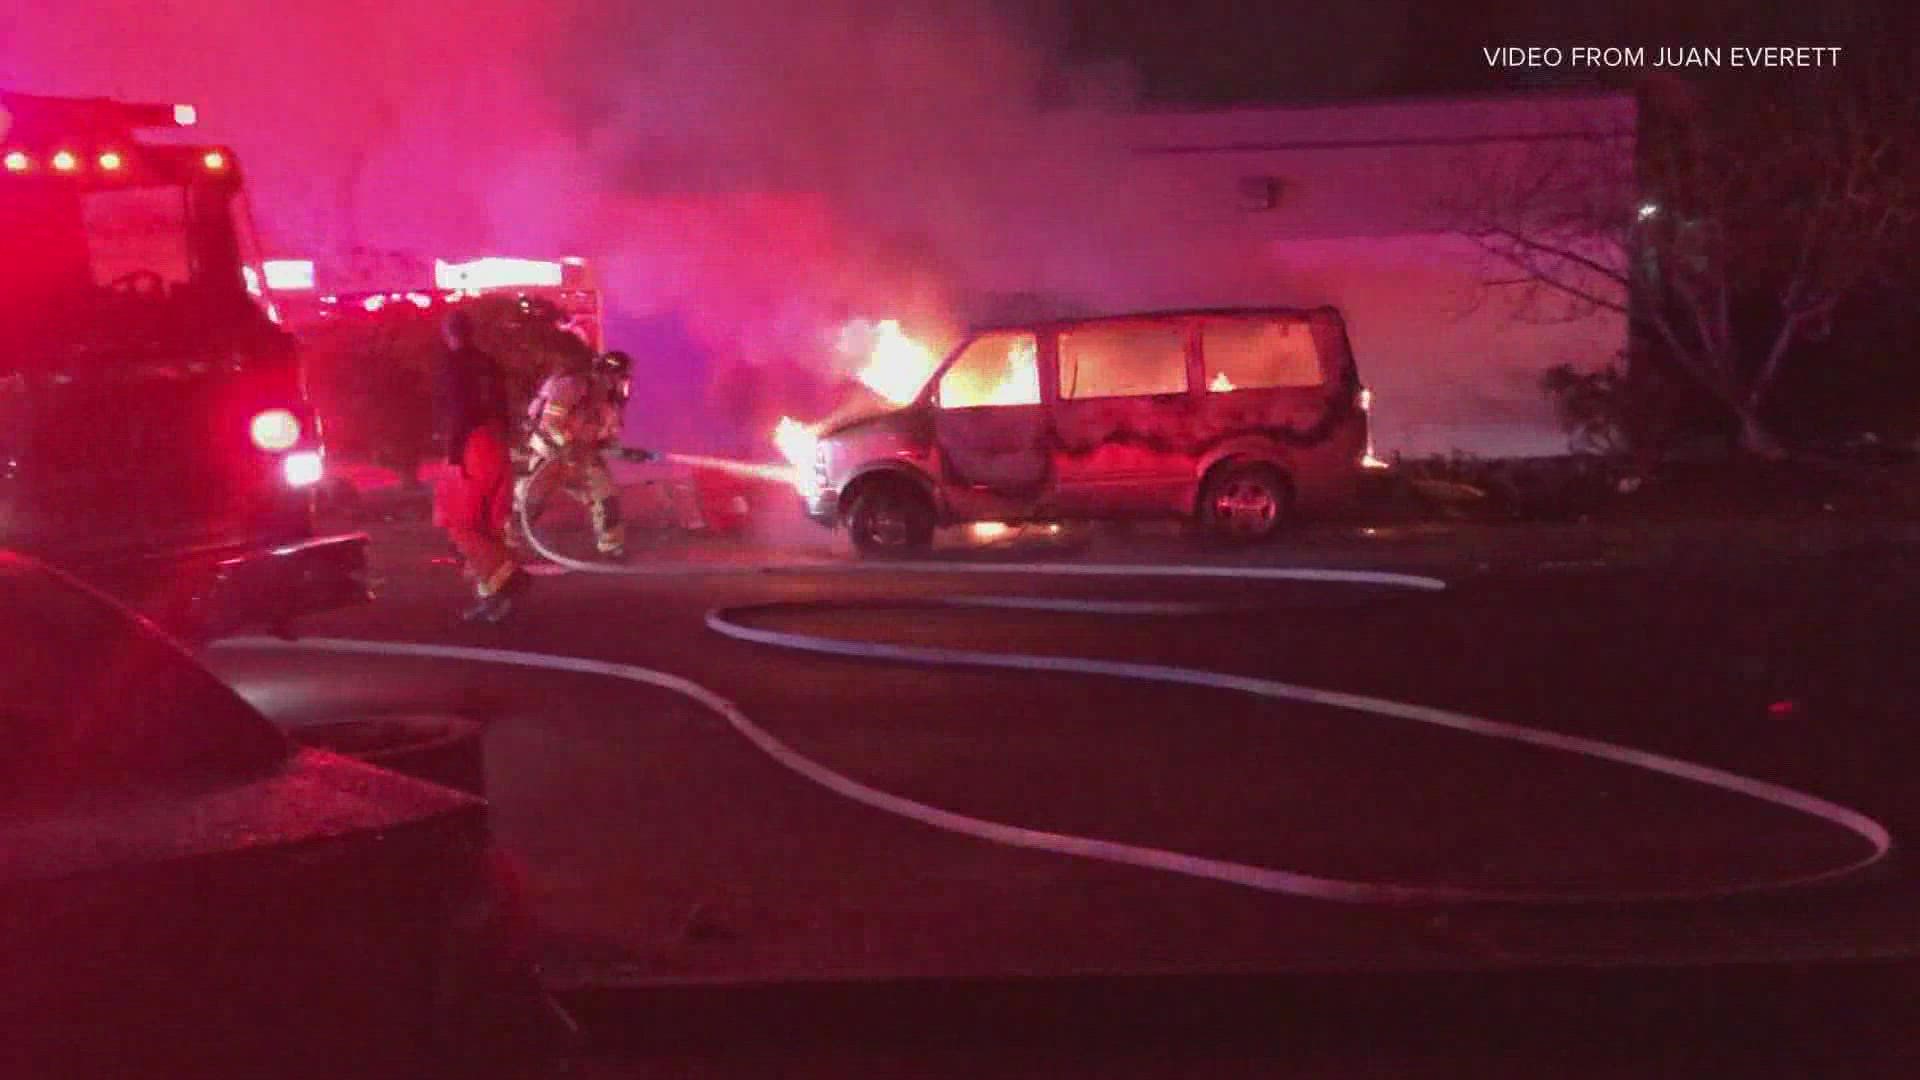 A bystander rescued two people from a van fire in Lakewood early Monday morning.